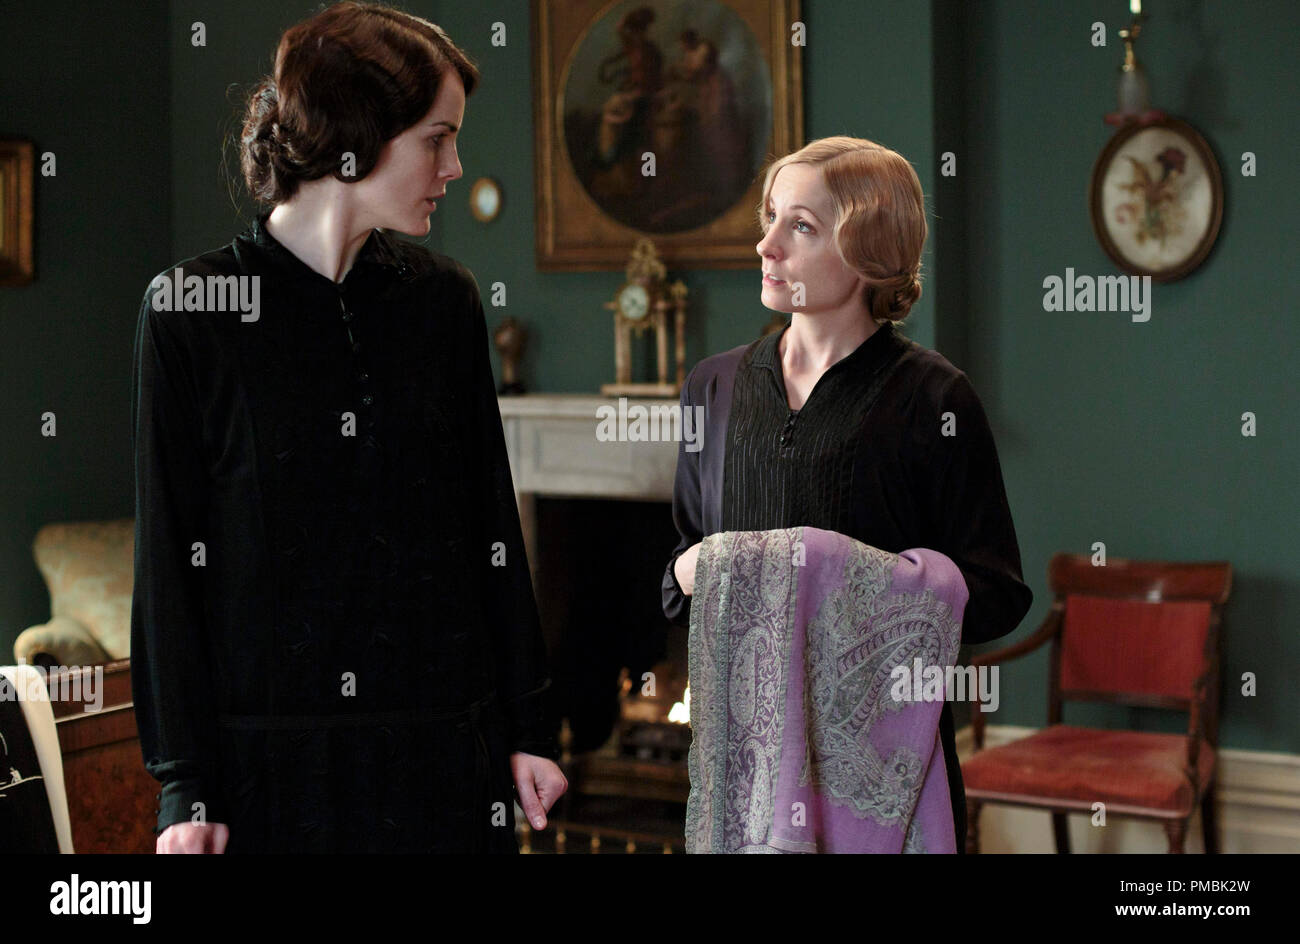 Downton Abbey Season 4 Shown From Left To Right Michelle Dockery As Lady Mary And Joanne 